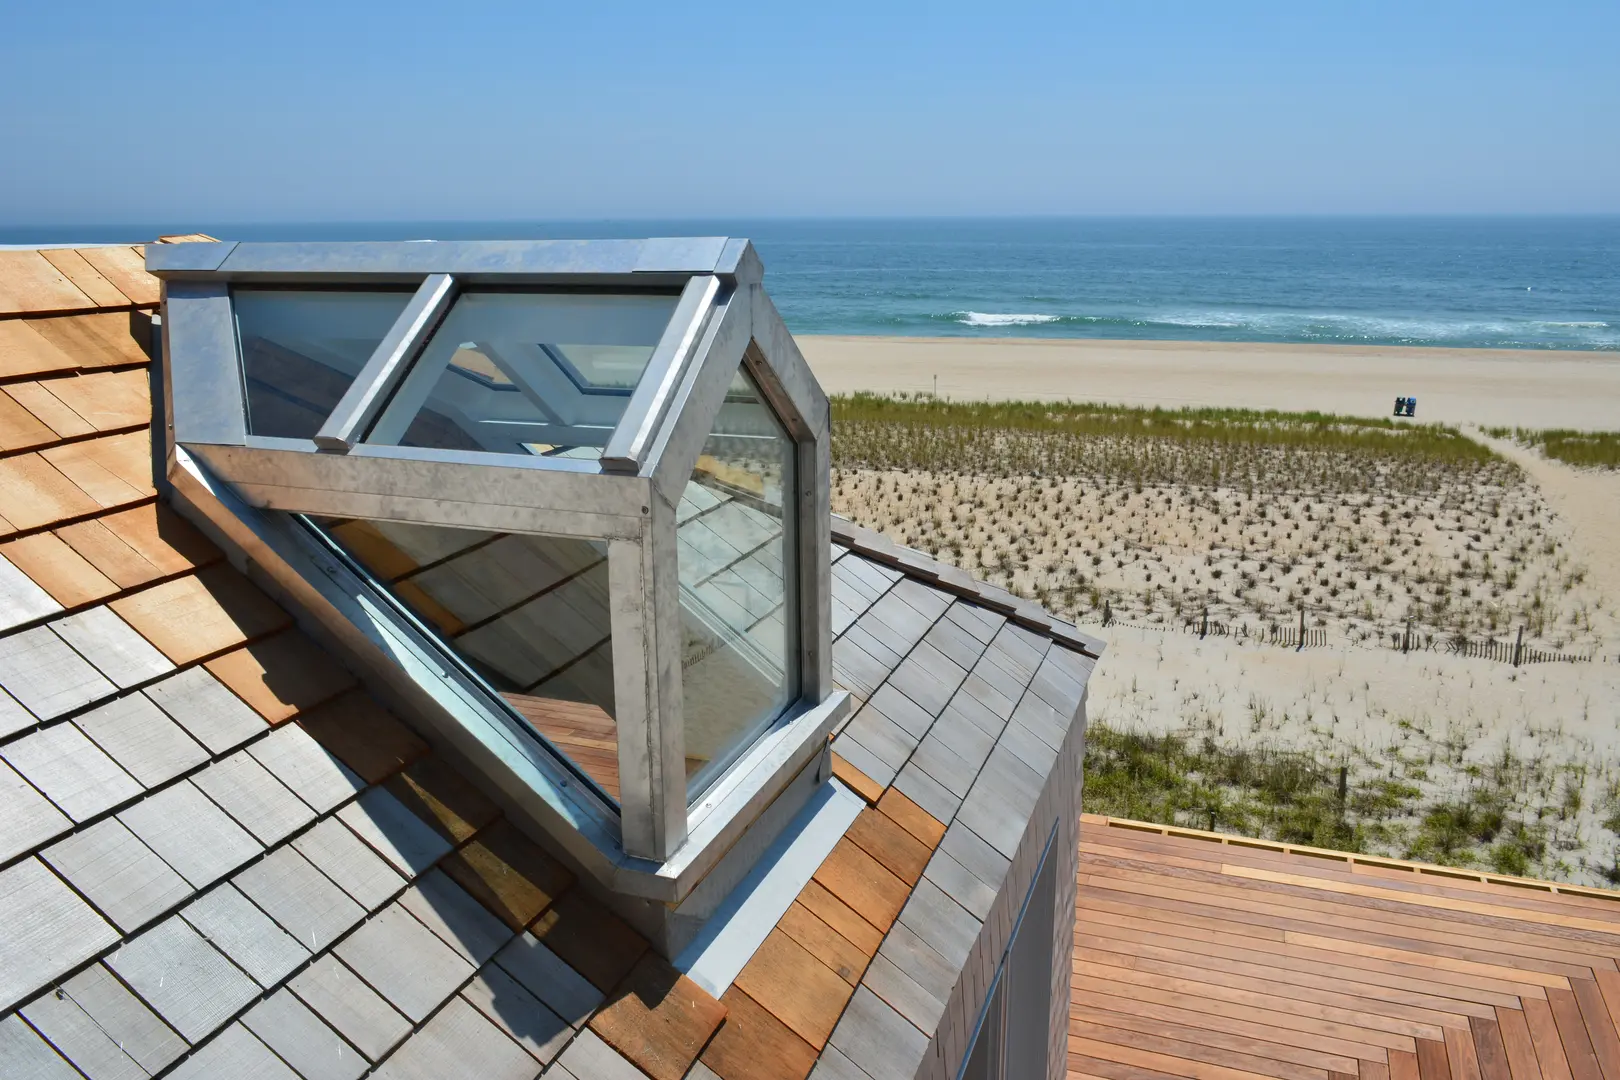 A roof with a glass window overlooking the beach.